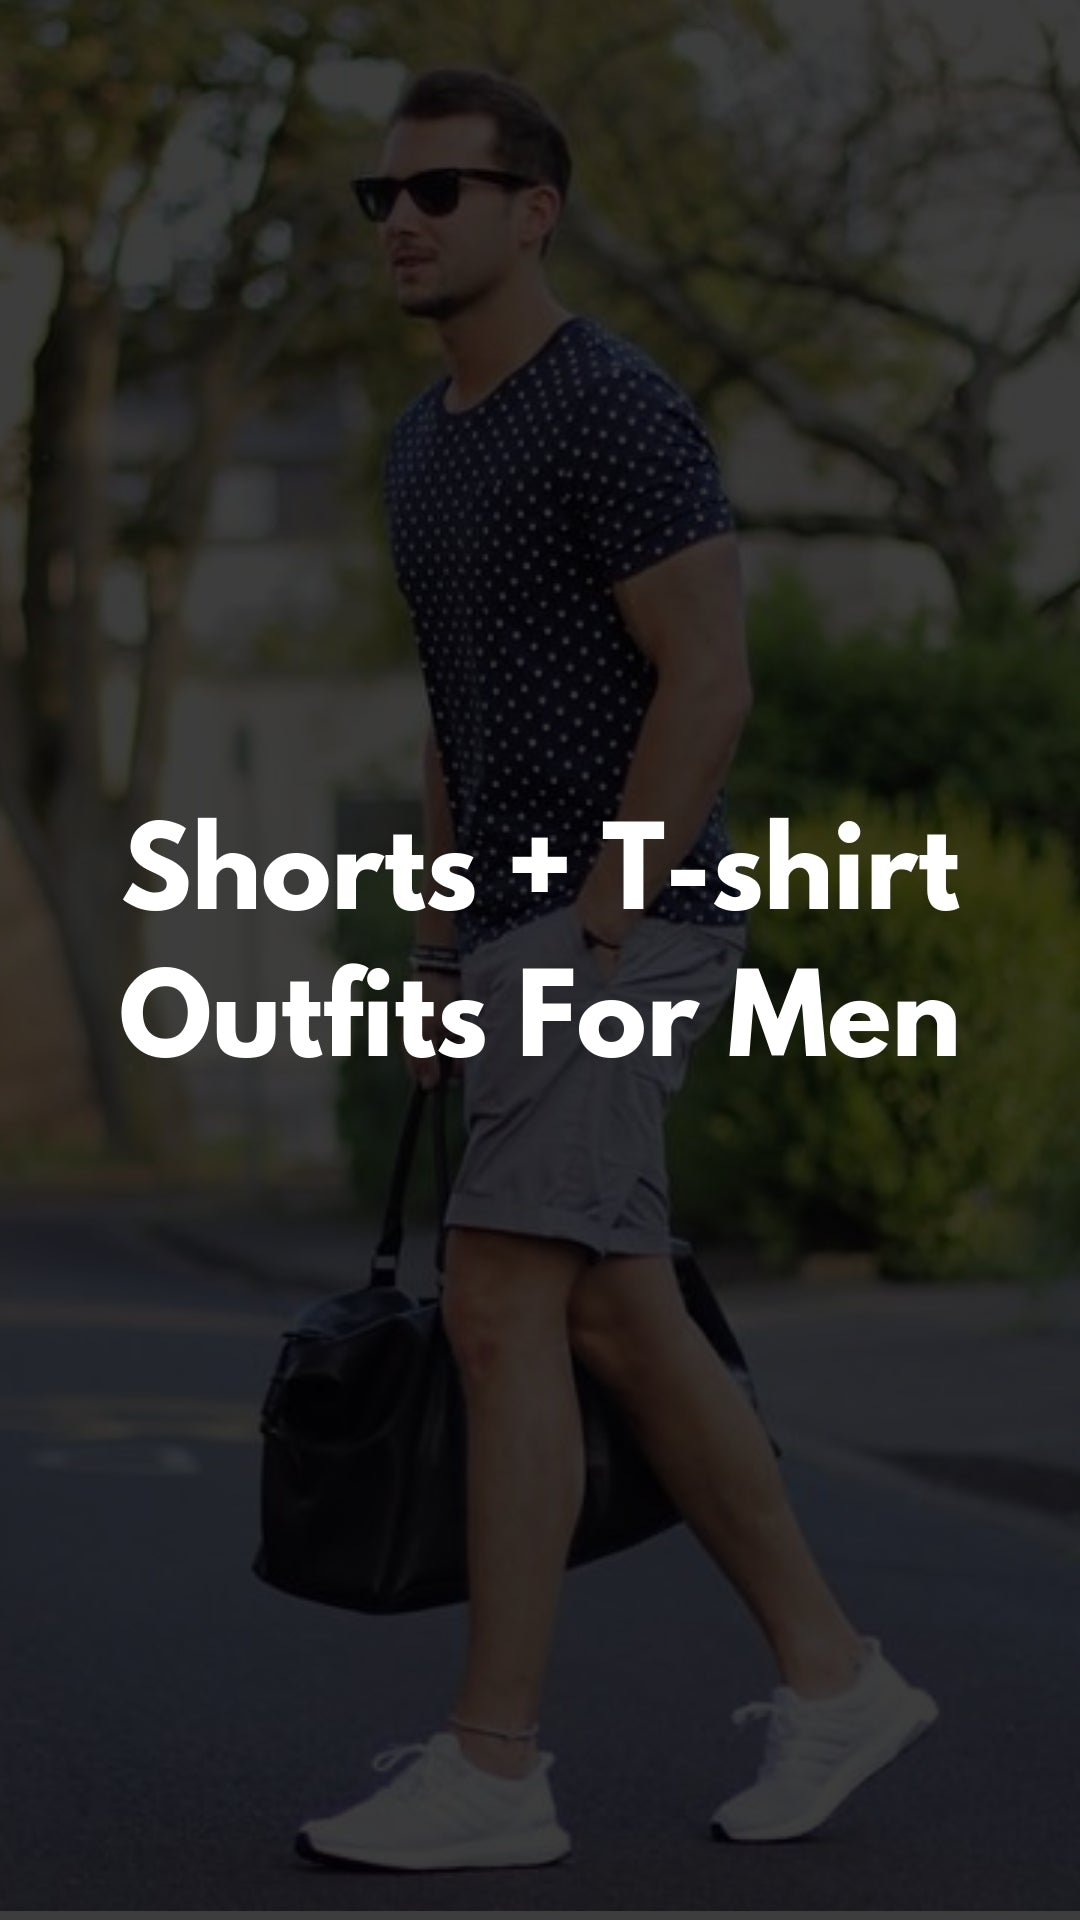 10 Ways To Wear Your T-shirt With Shorts #mensfashion #streetstyle